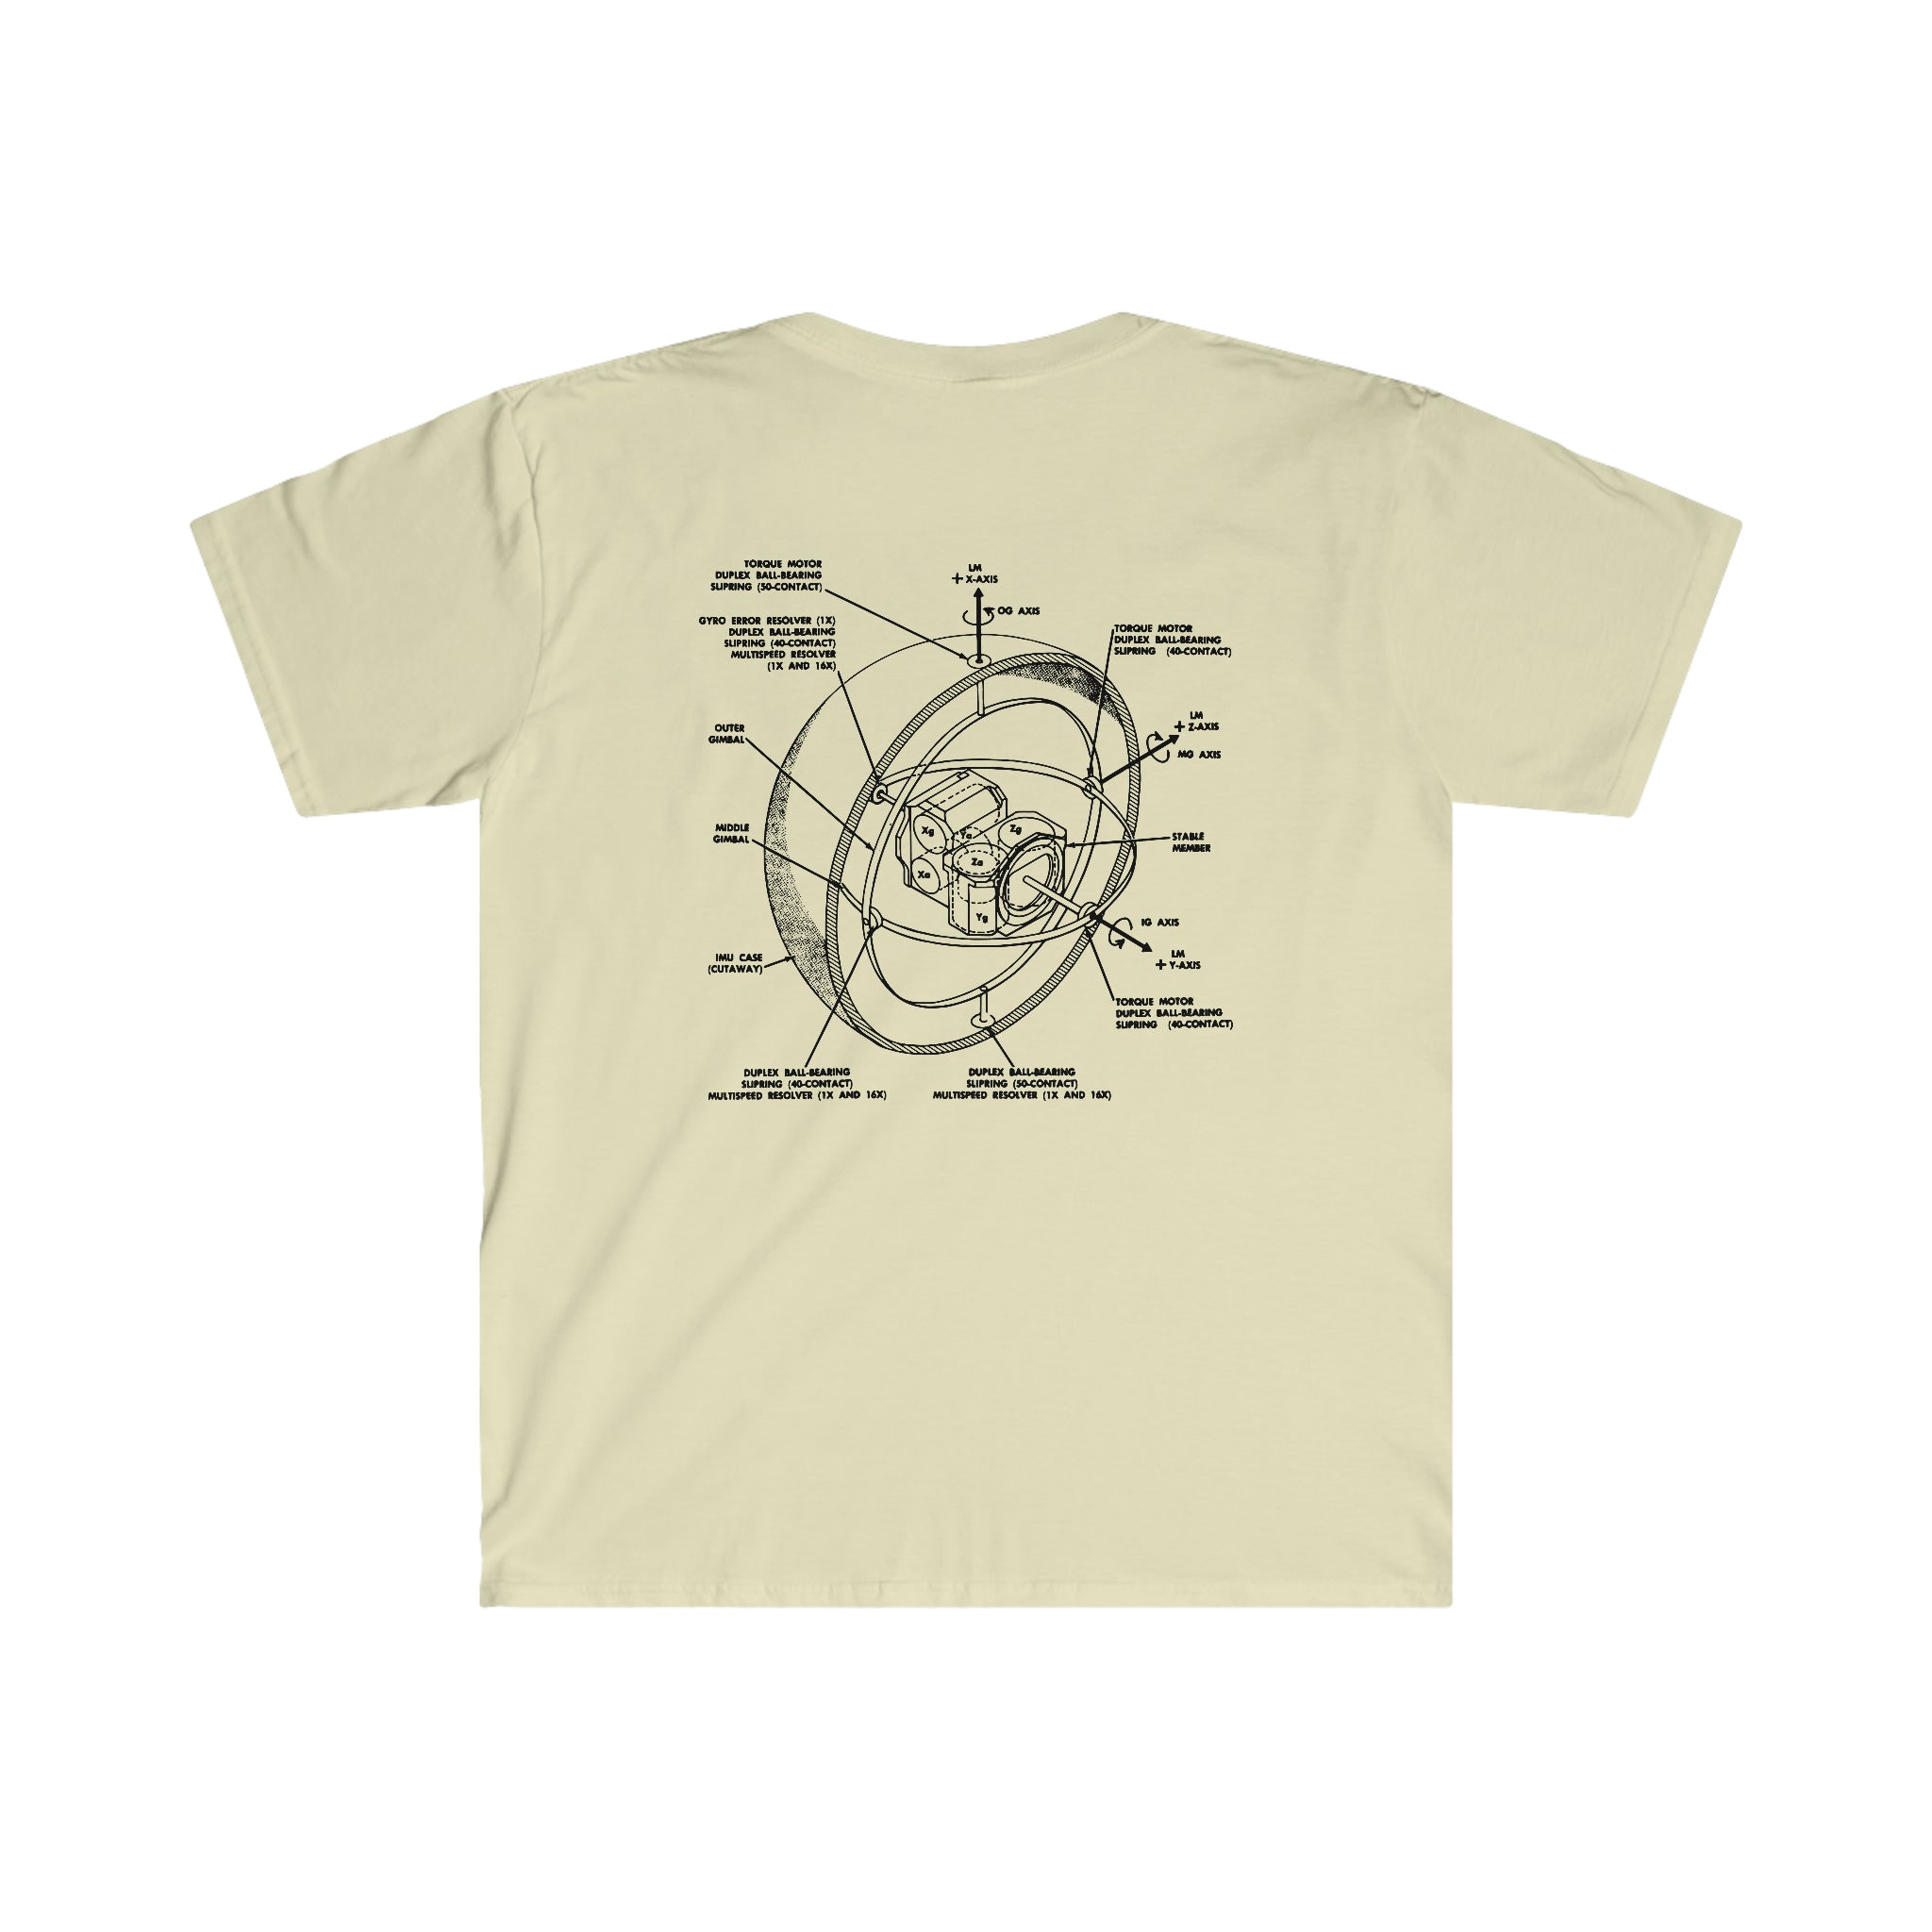 A Space Axis T-Shirt made of soft cotton, available in multiple colors.